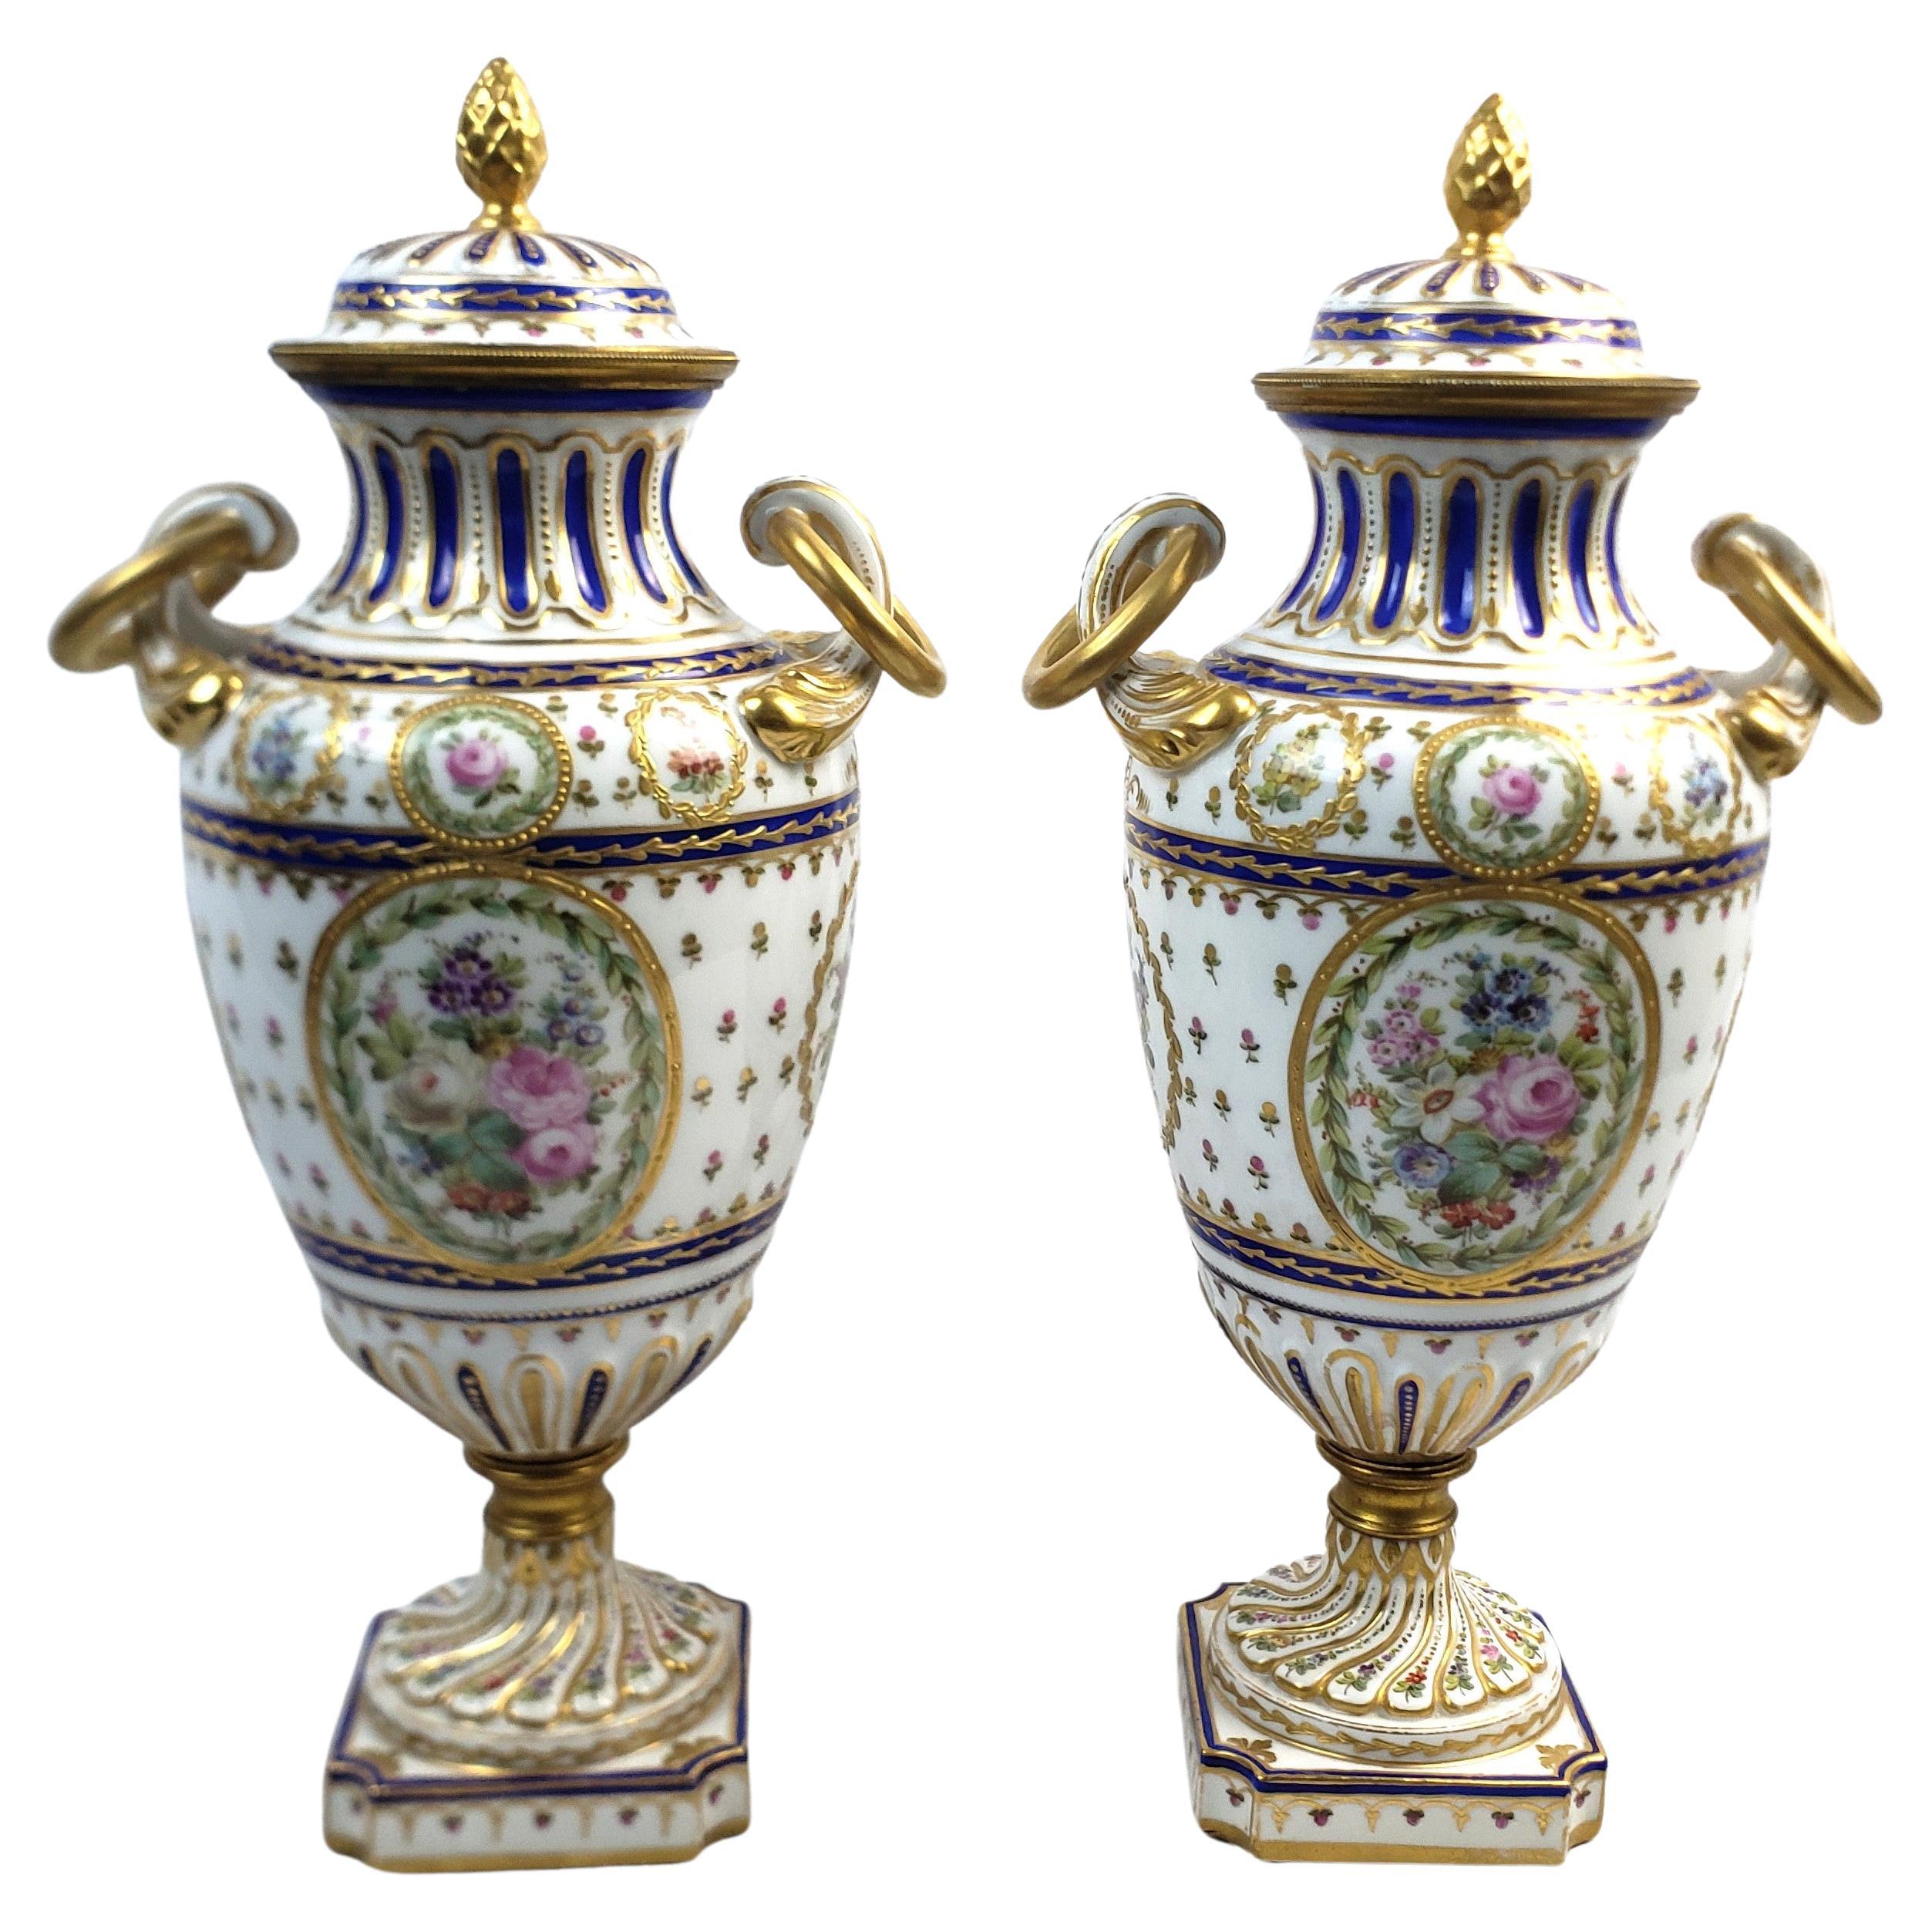 Pair of Antique Sevres Styled Covered Urns with Ornate Hand-Painted Decoration